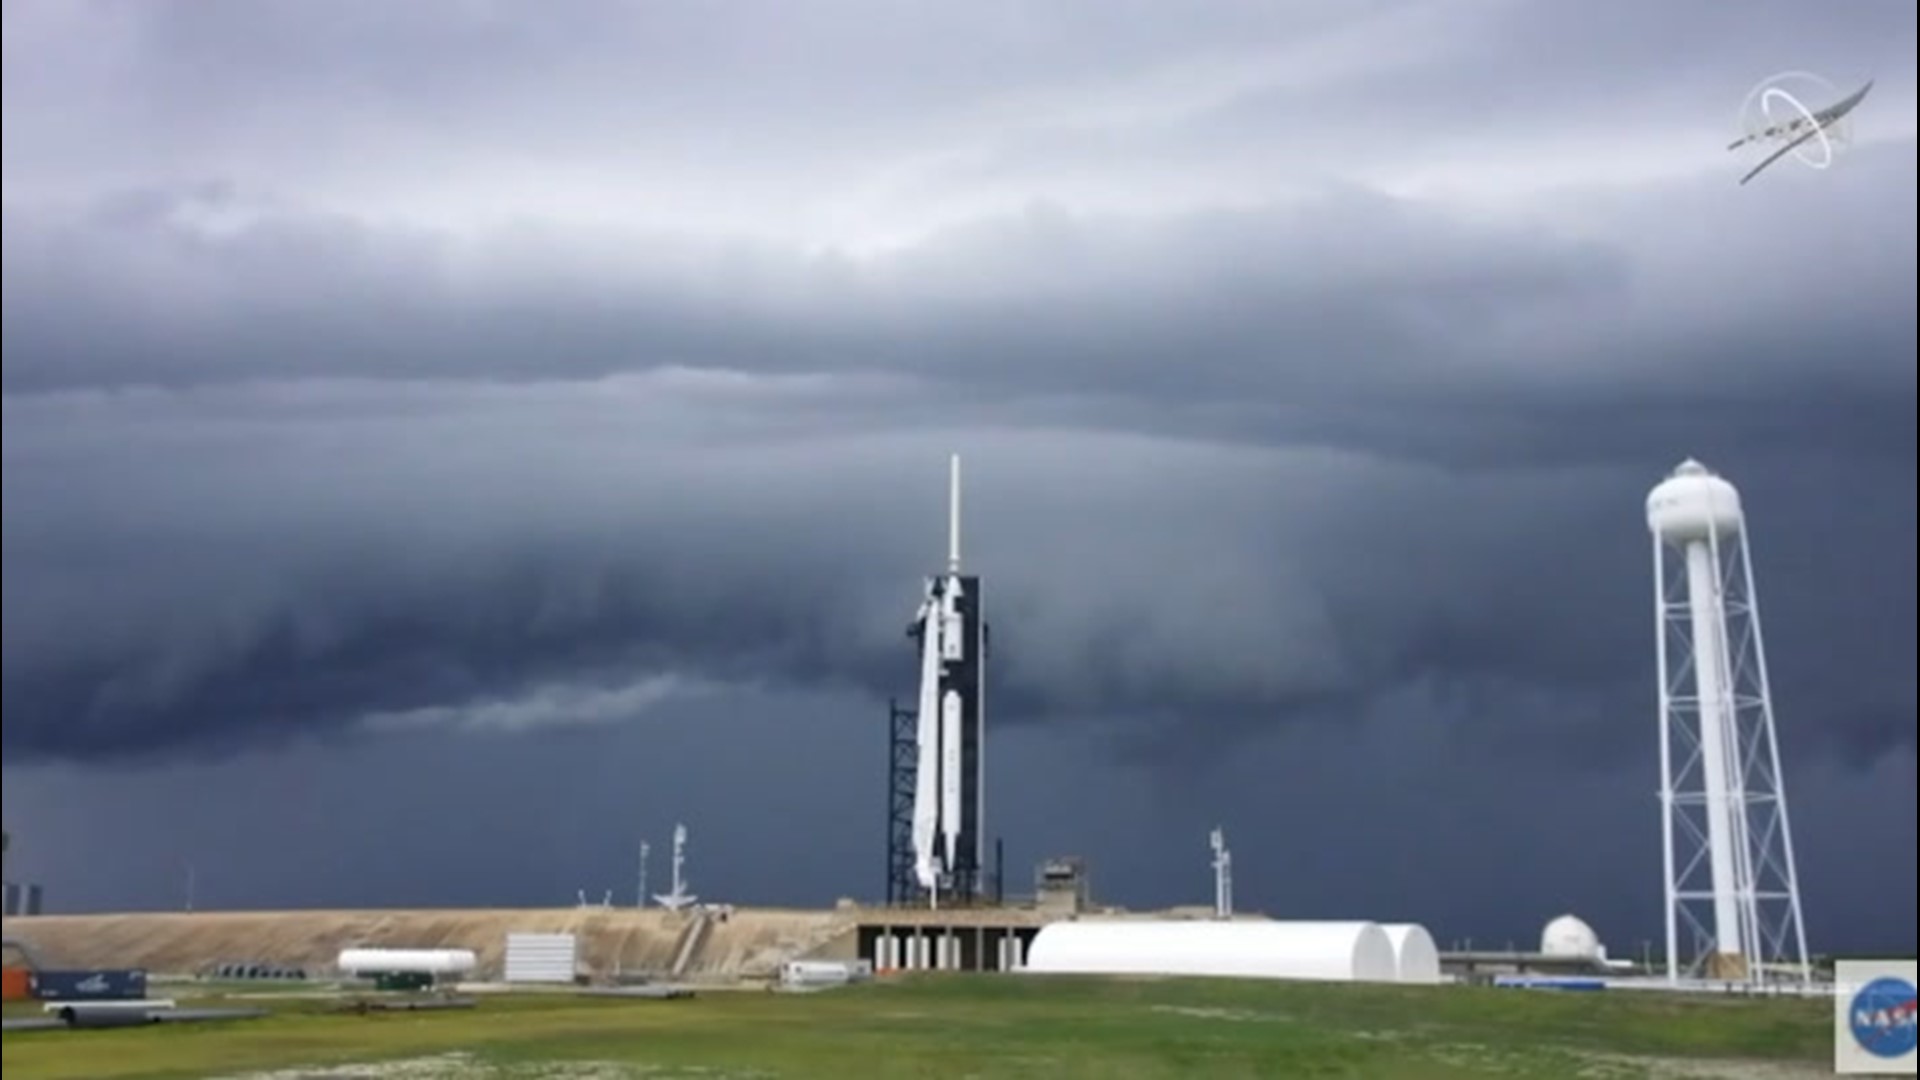 Take a look at this ominous shelf cloud hovering above the Falcon 9 rocket, which is set to launch at 4:33 p.m. EDT from Cape Canaveral, Florida, on May 27.